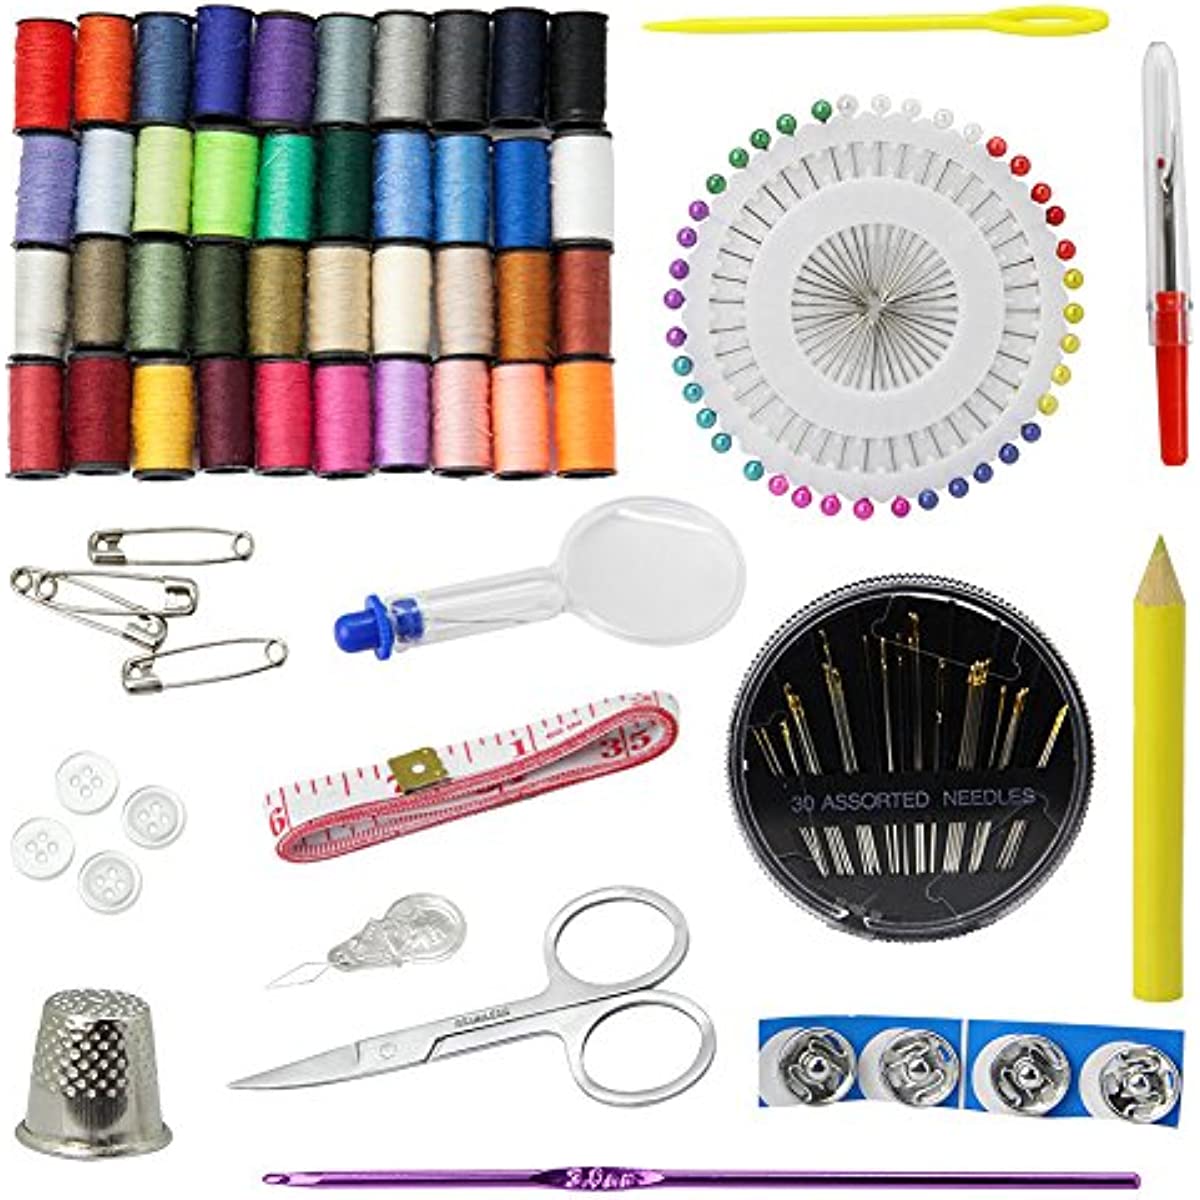 10 Best Sewing Kits 2022 — Best Sewing Kit for Beginners and Pros